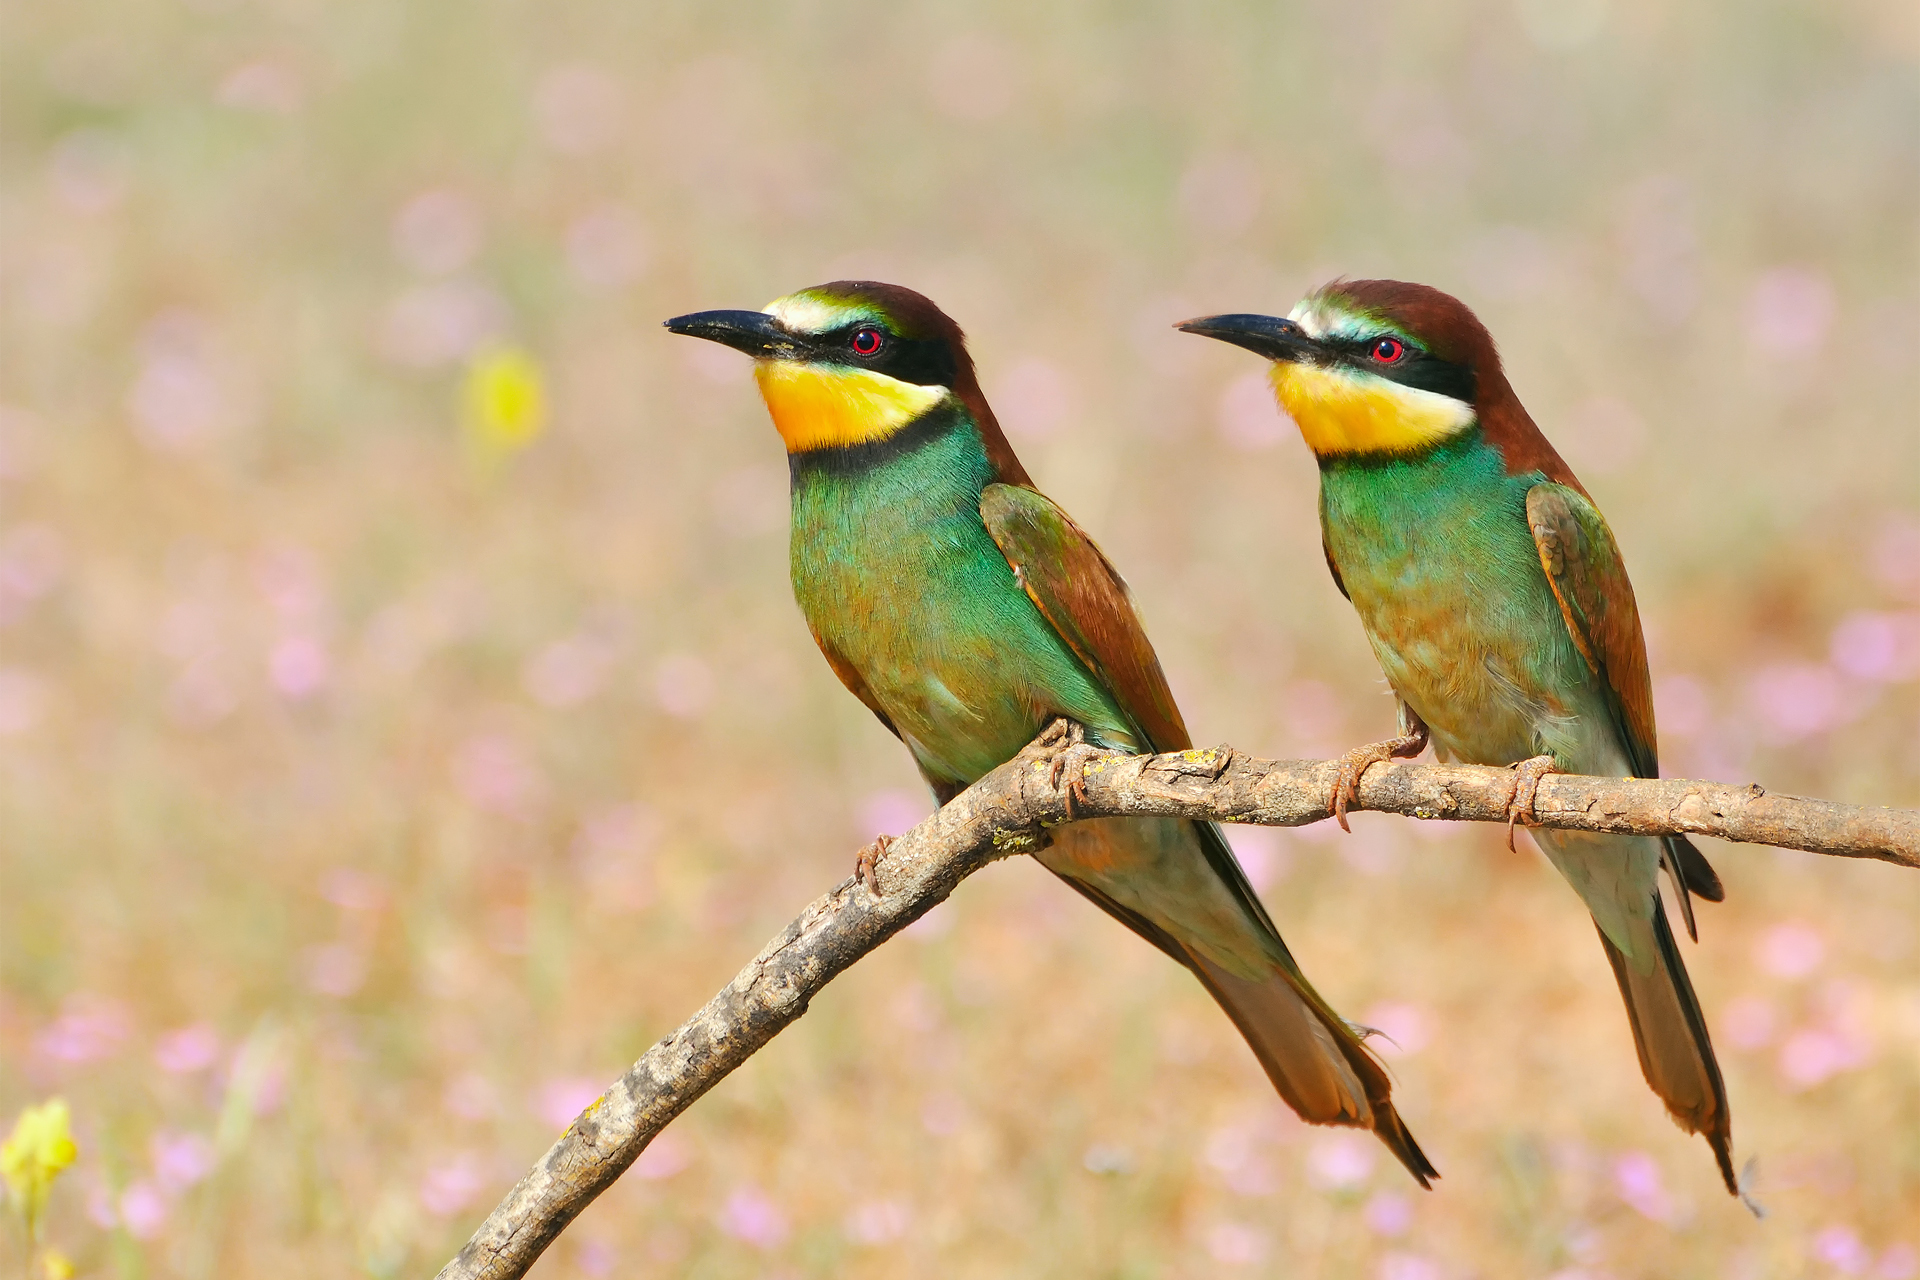 68458 download wallpaper birds, animals, branch, bee-eaters, golden shhurka, golden bee-eater screensavers and pictures for free